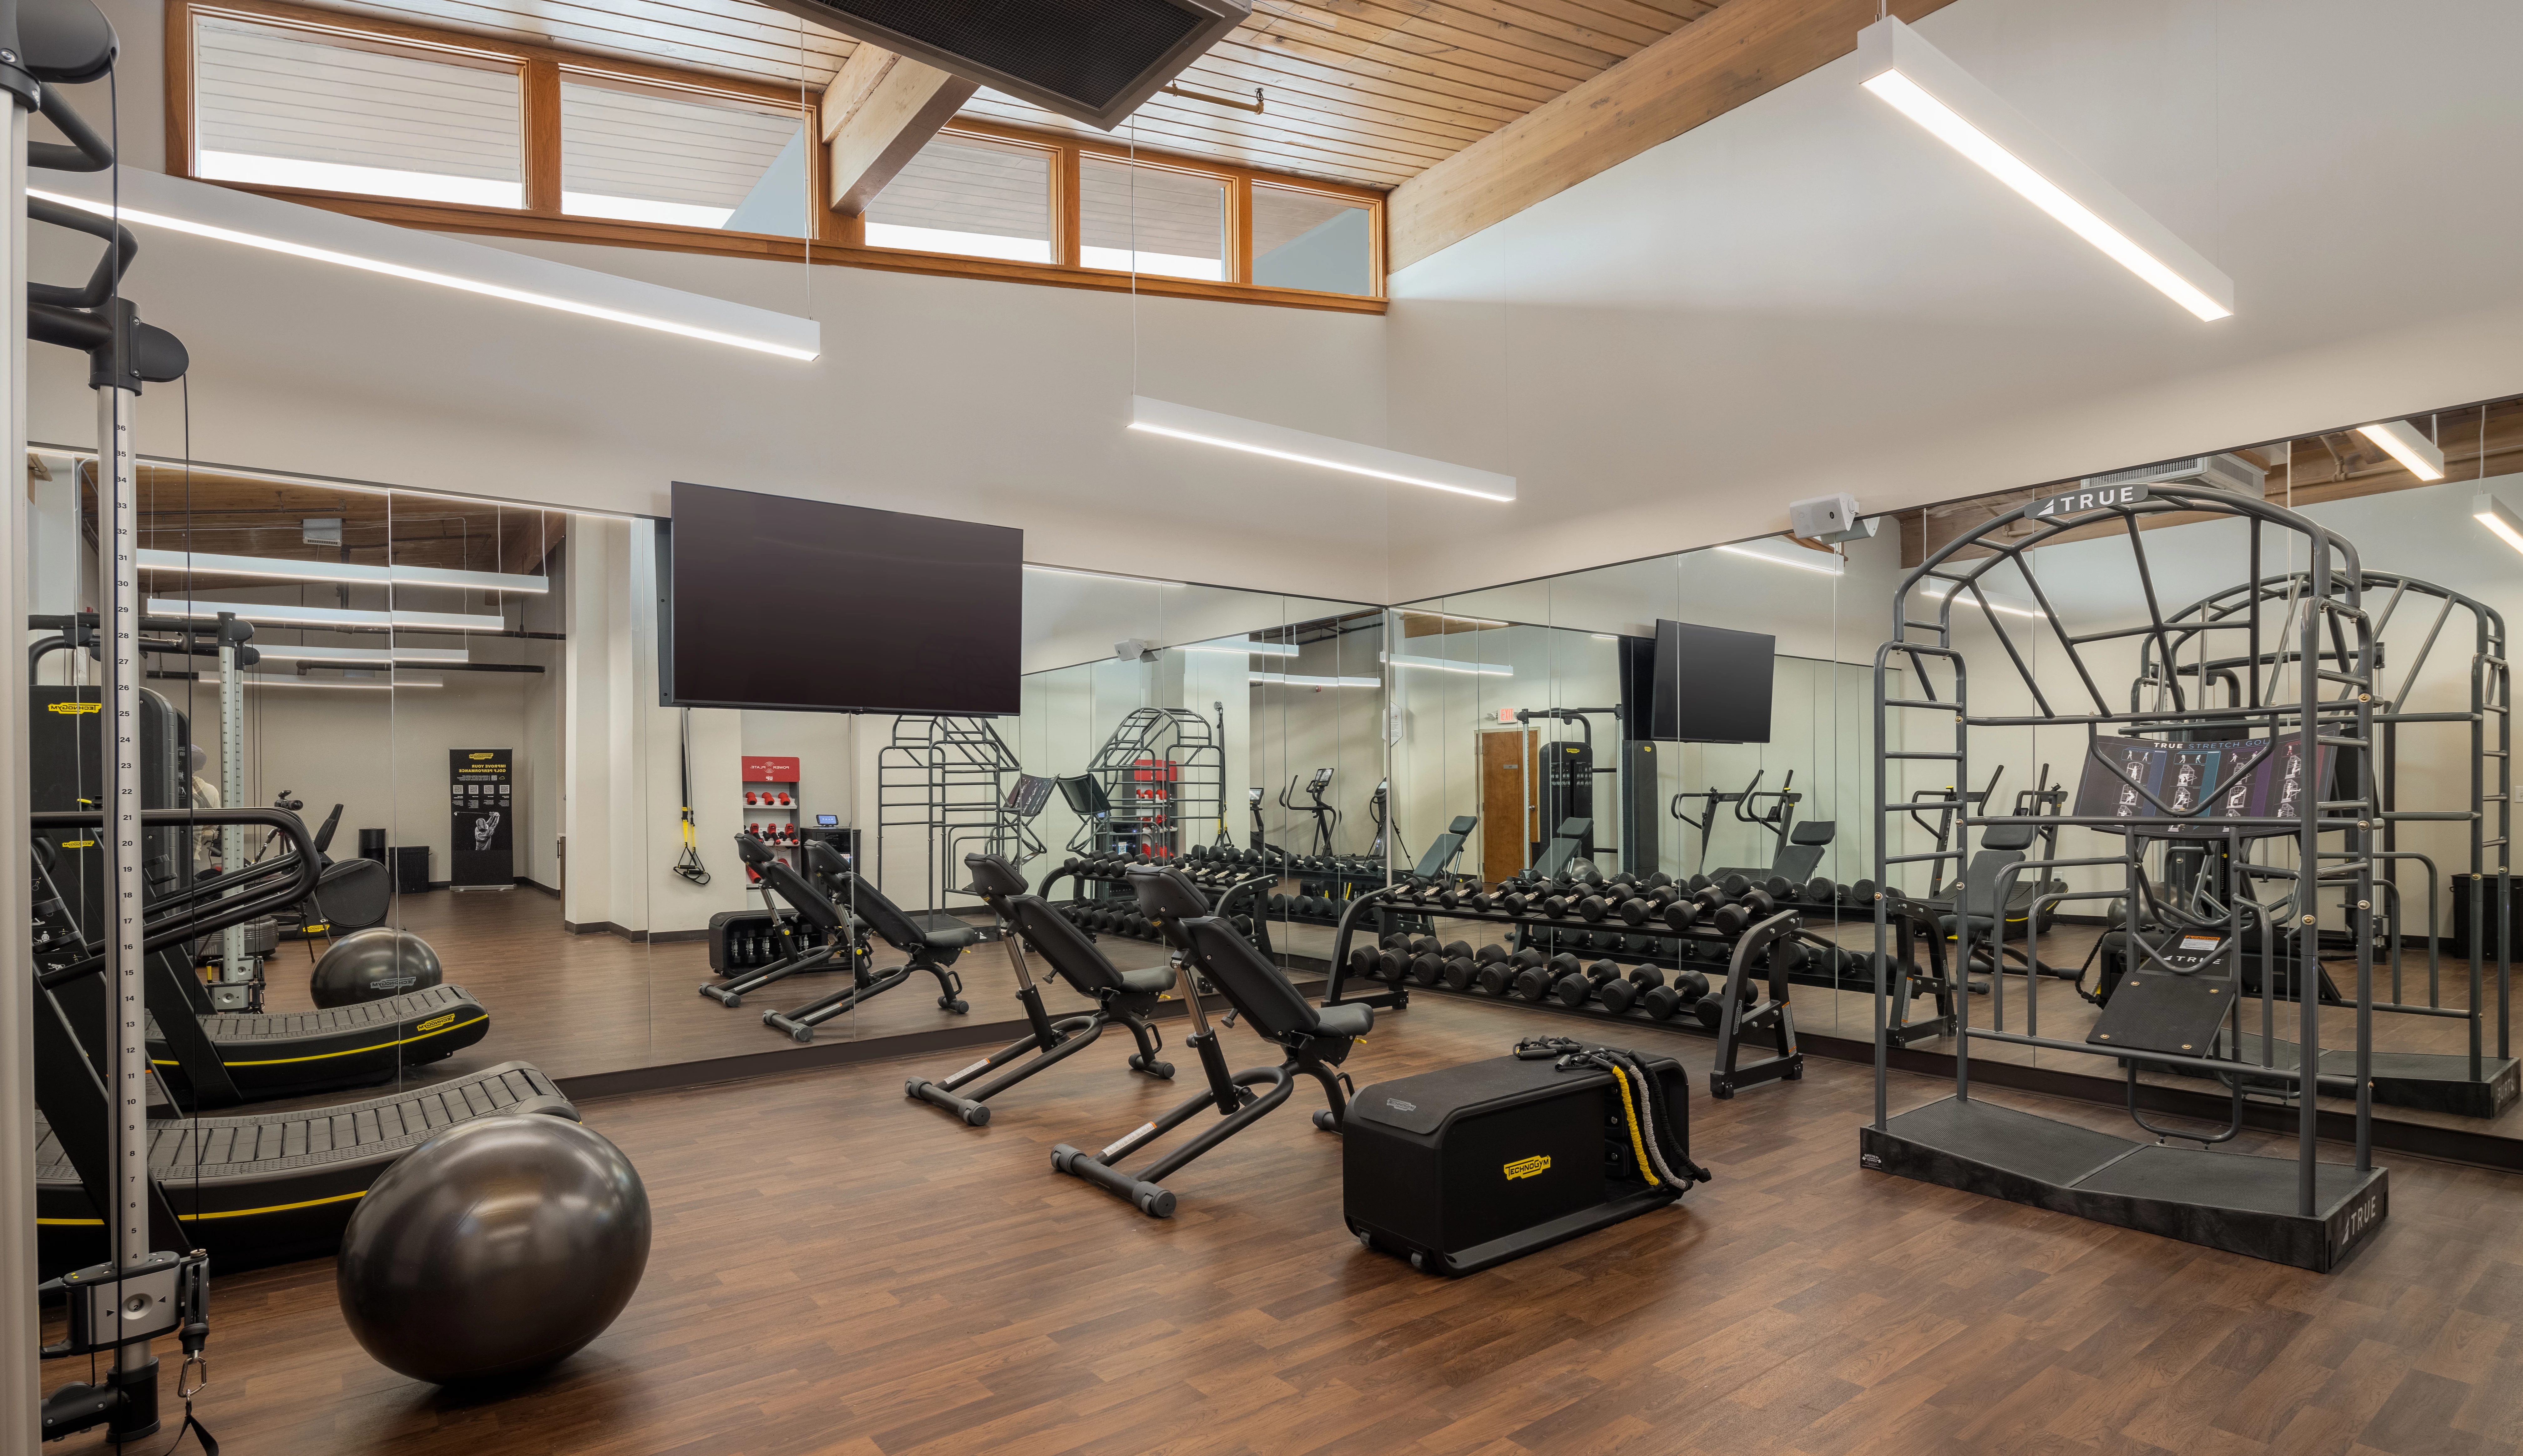 Firestone Fitness Center and Gym